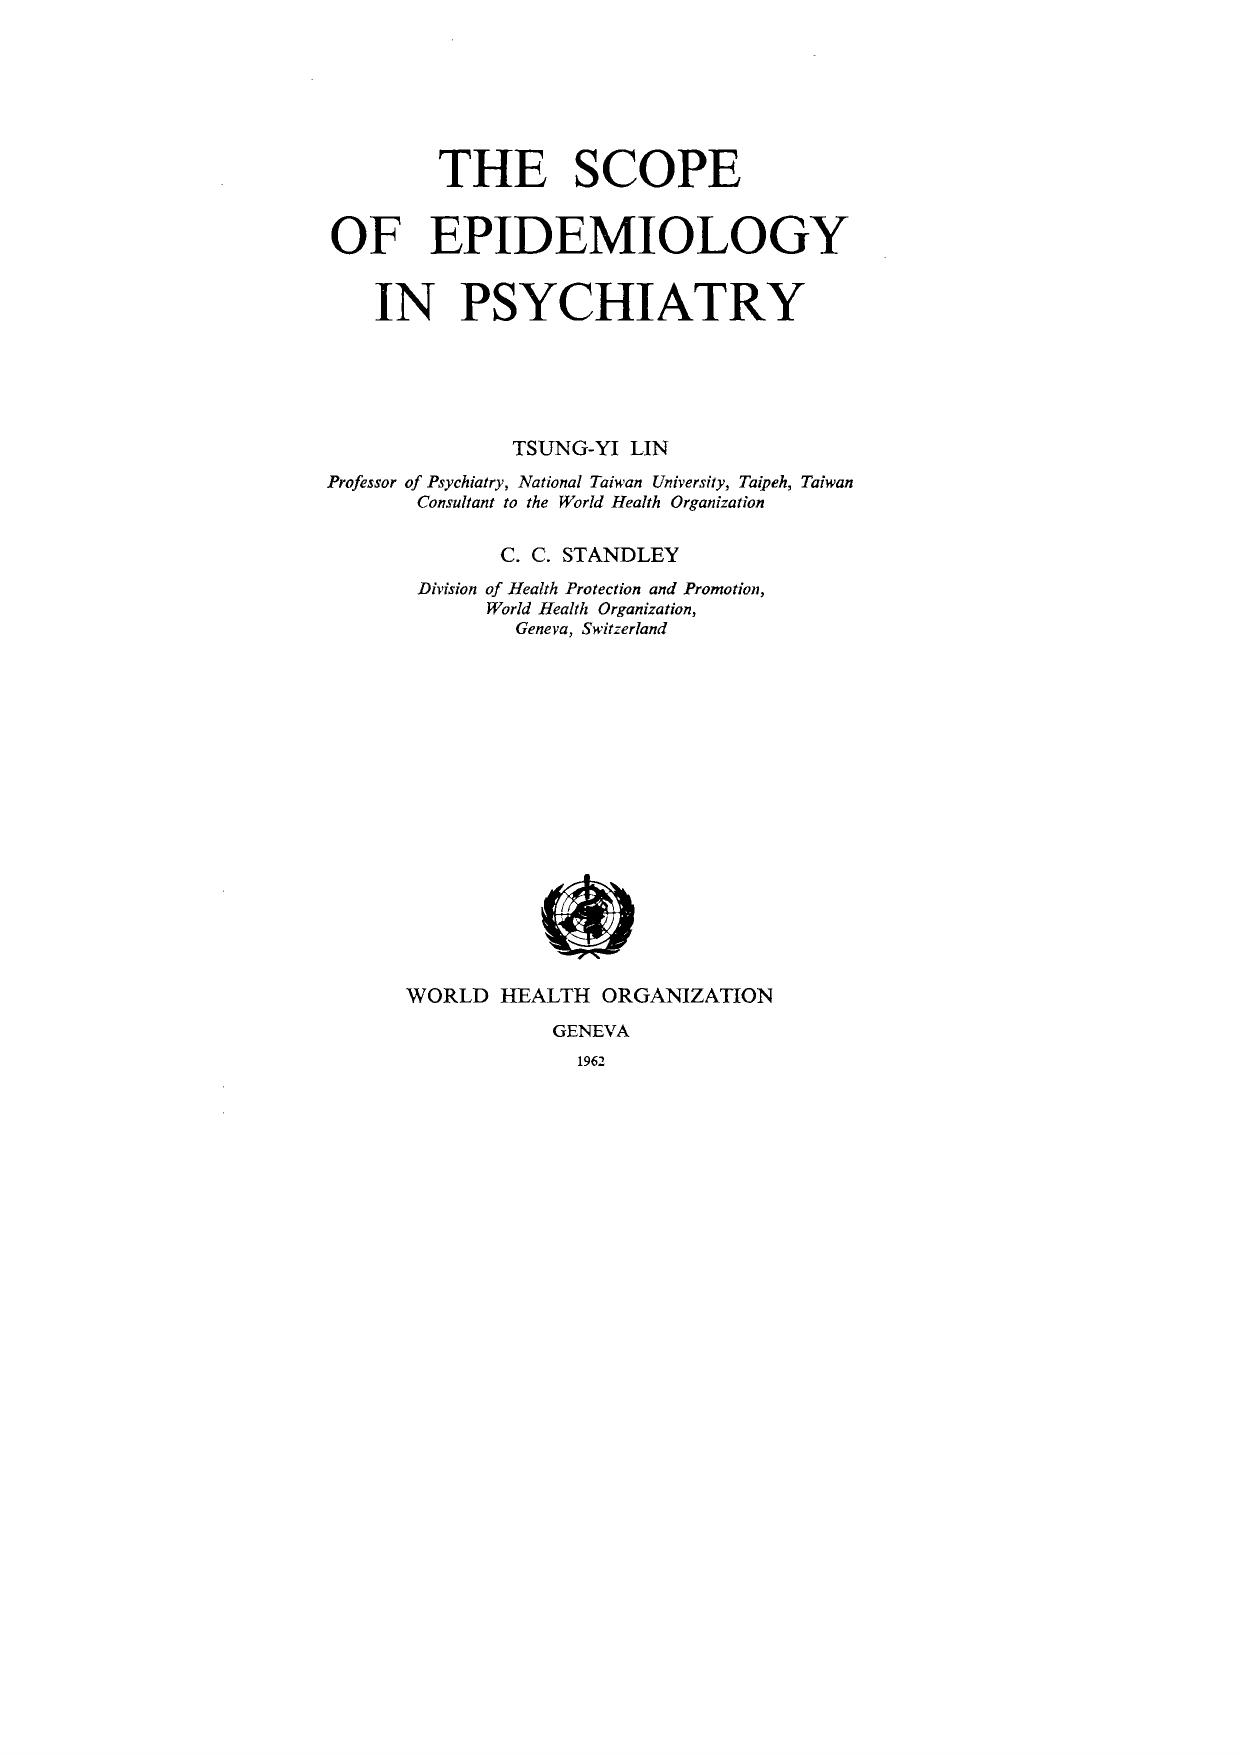 The Scope of Epidemiology in Psychiatry 1962